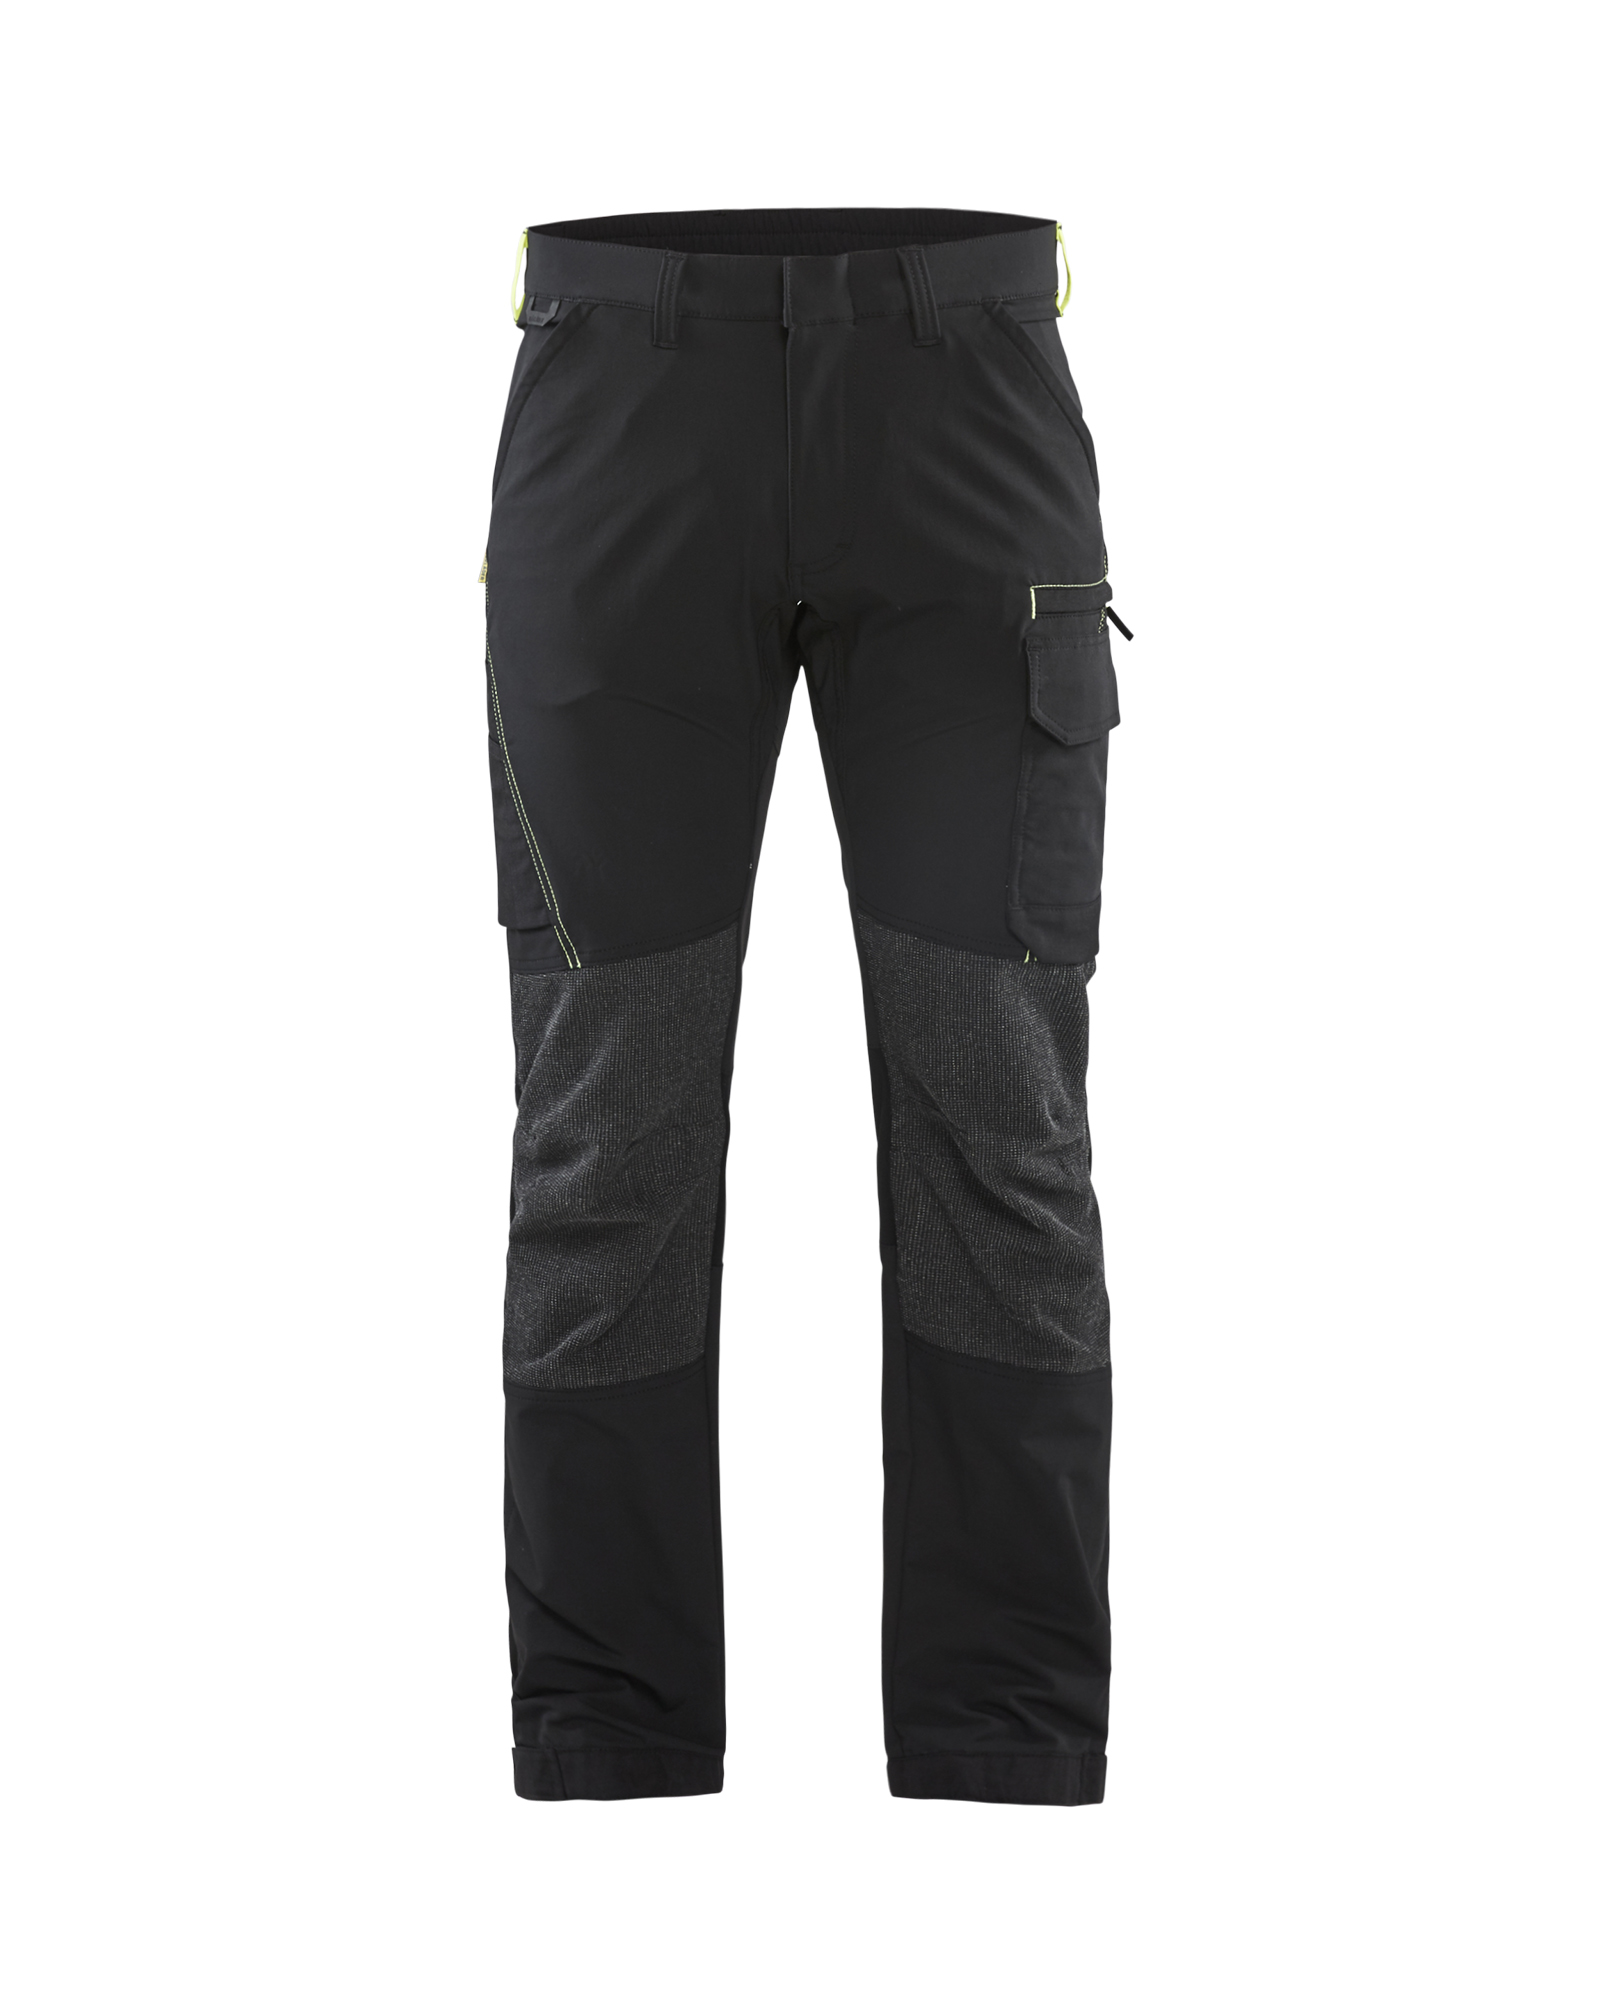 Blaklader Stretch Painters Trousers [Free Shipping] – MTN Shop EU